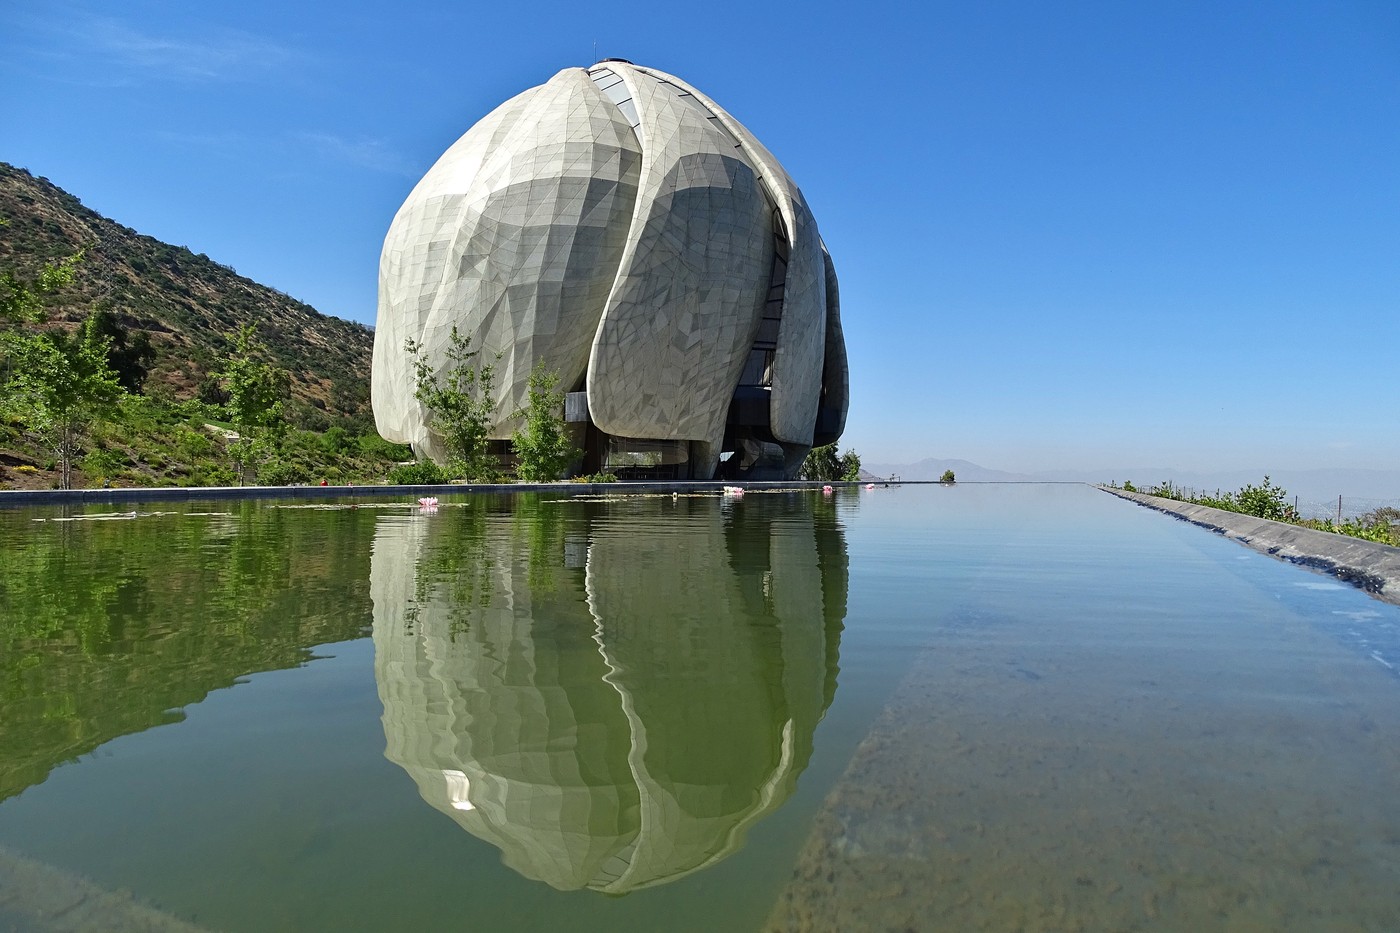 Bahá’í House of Worship of South America located in located in the foothills of the Andes in Santiago de Chile. (Foto: Getty Images/iStockphoto)